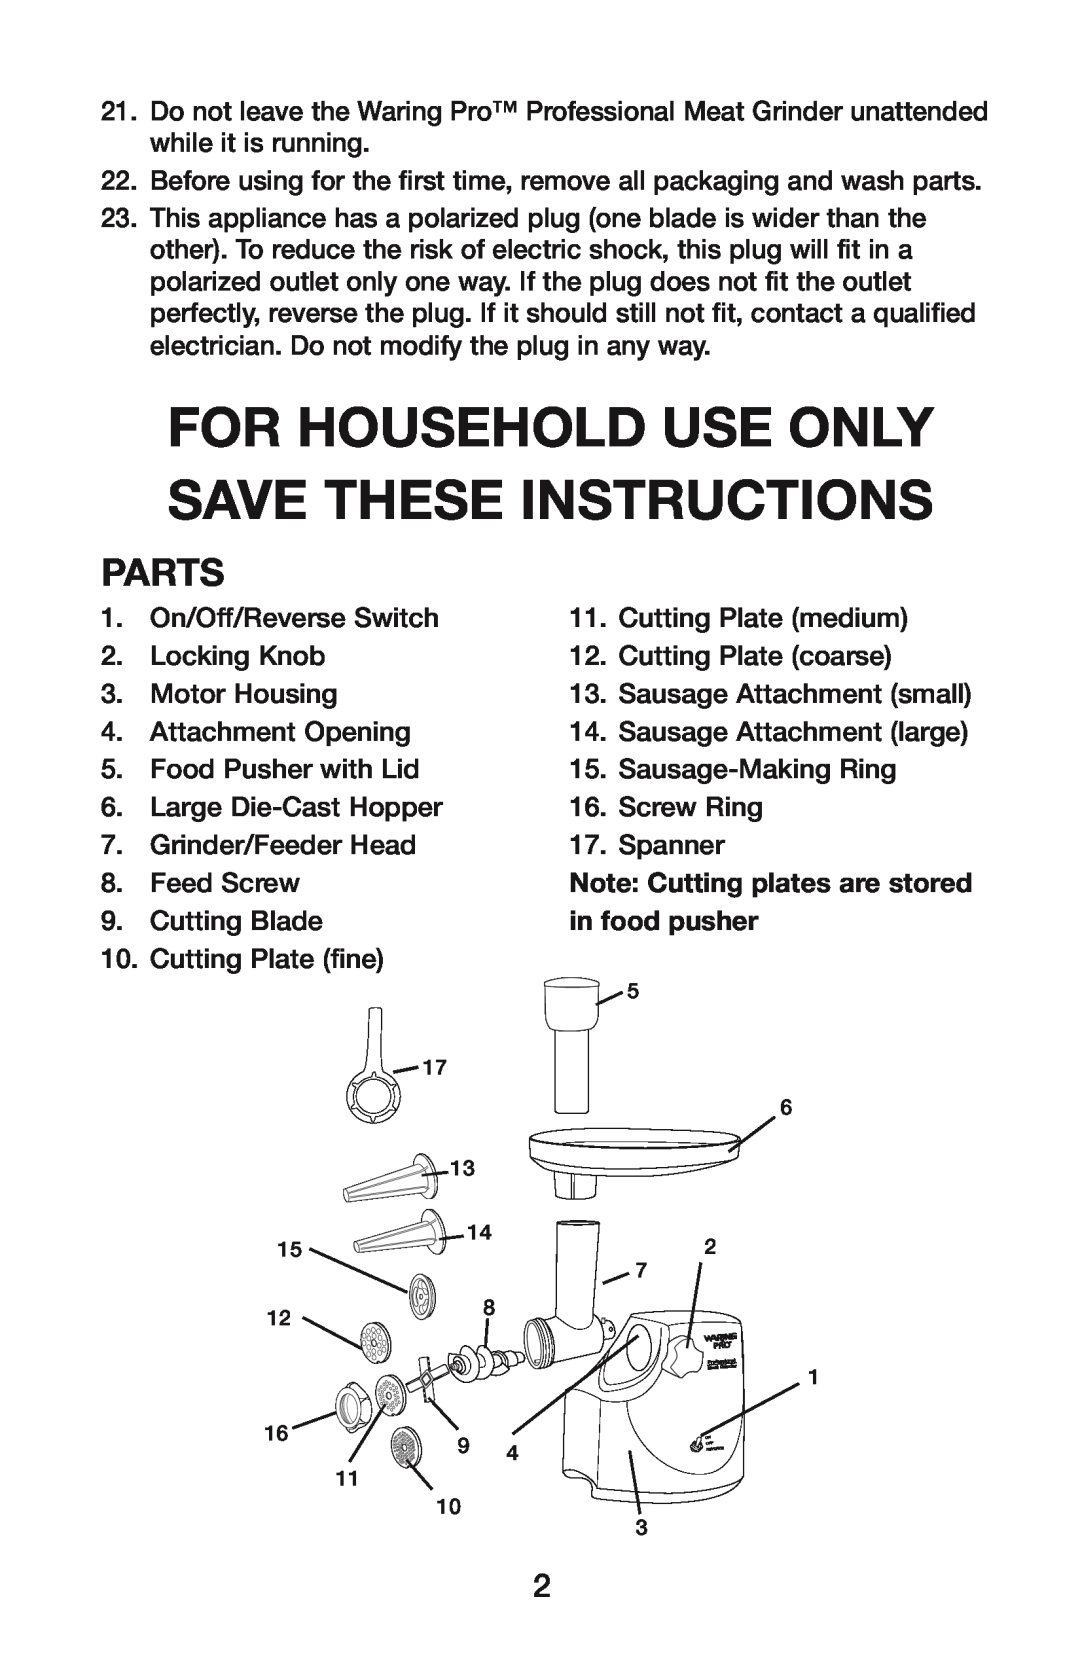 Waring MG800 manual Parts, For Household Use Only Save These Instructions 